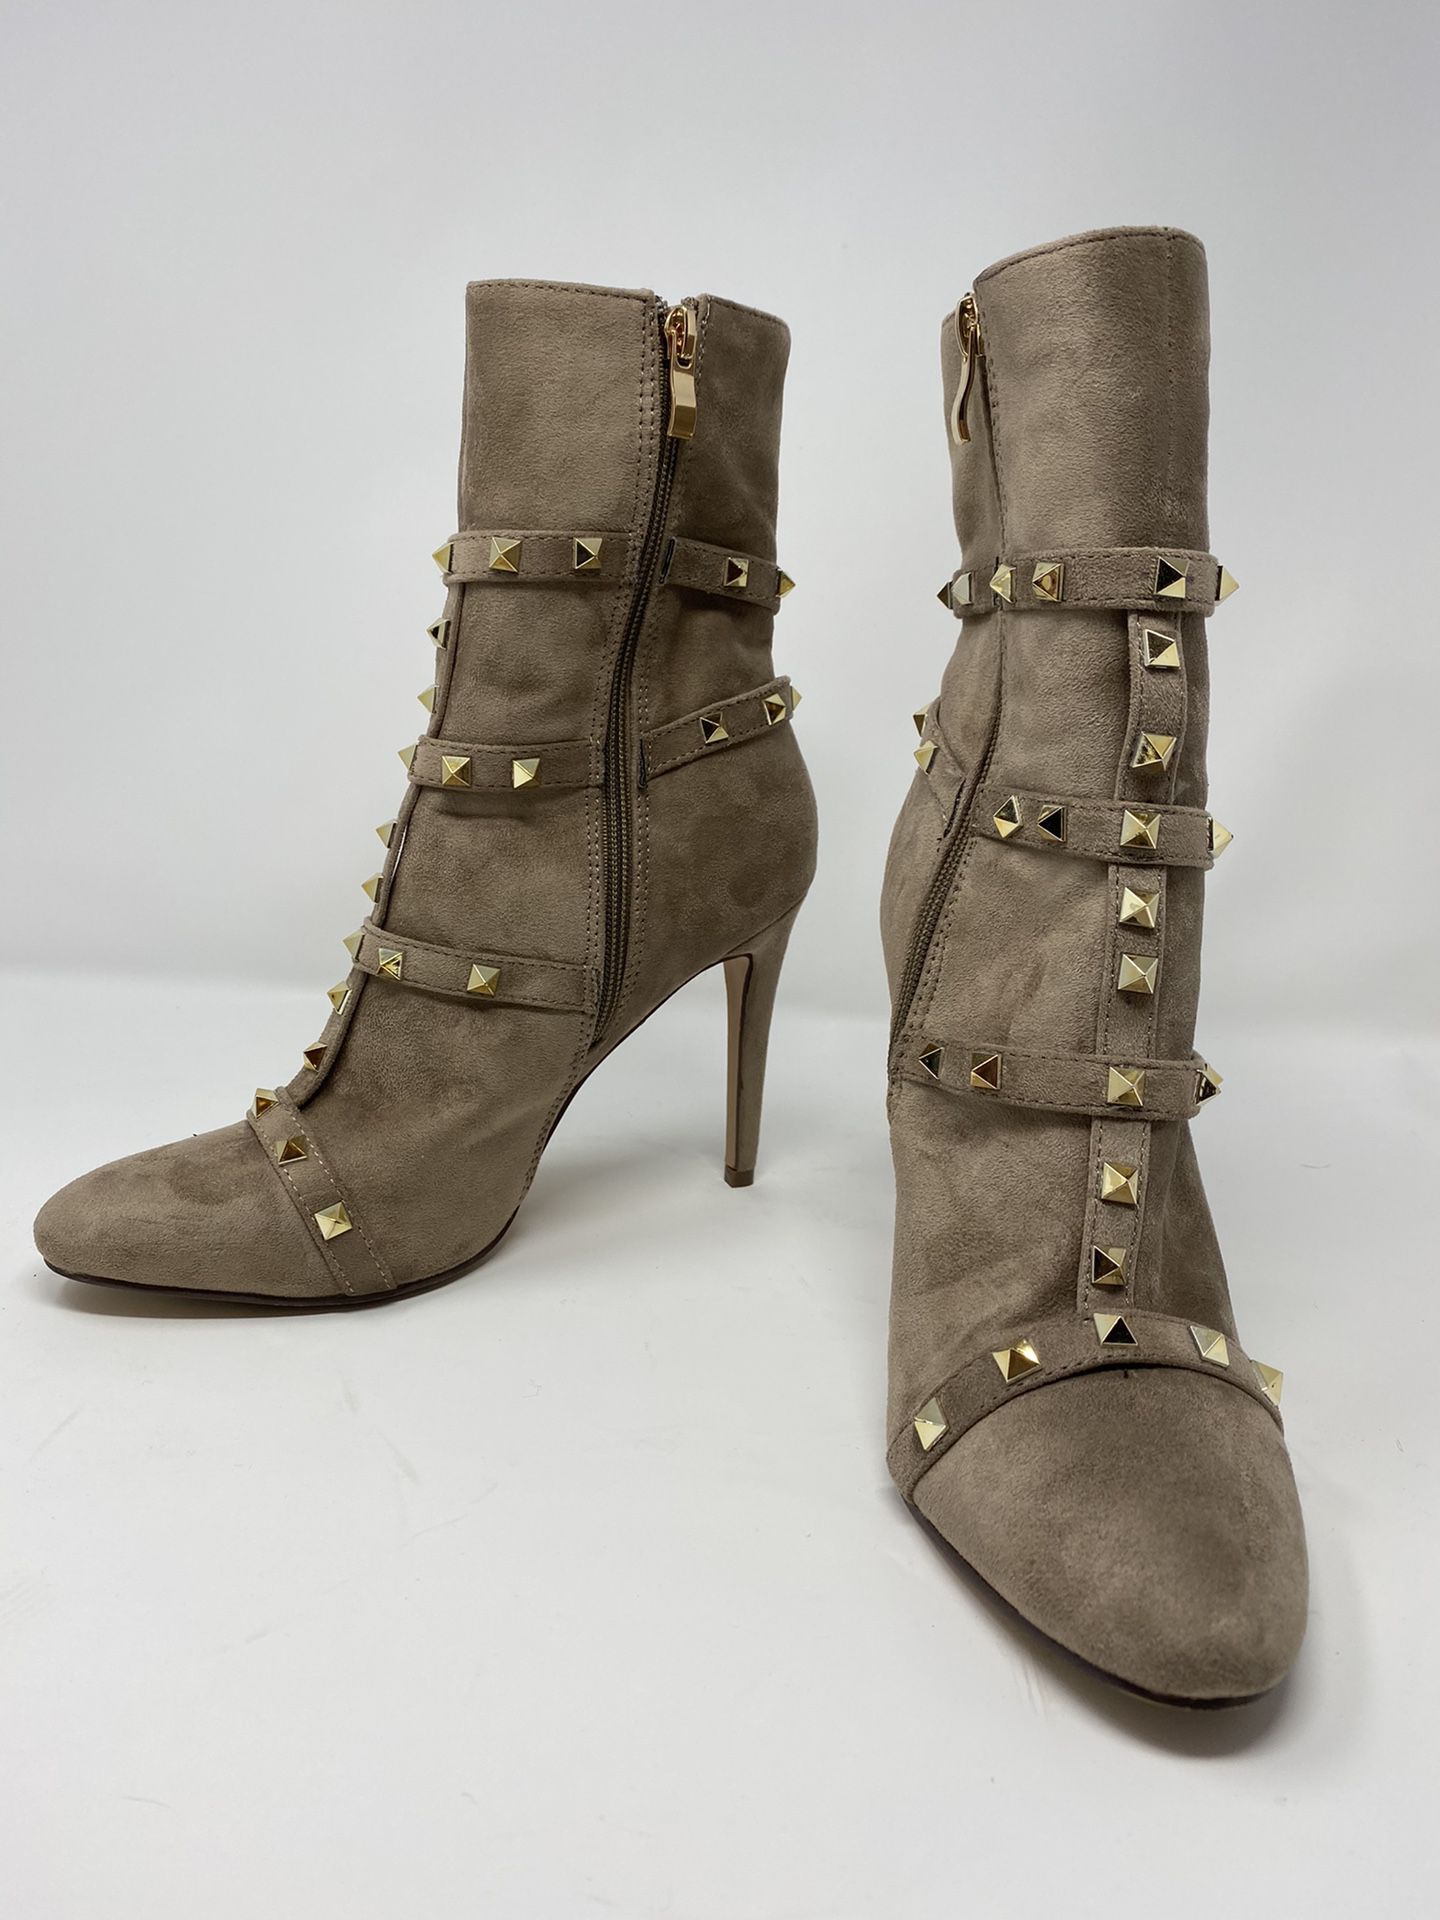 NUDE SUEDE GOLD STUDDED MID-CALF BOOTS 4”